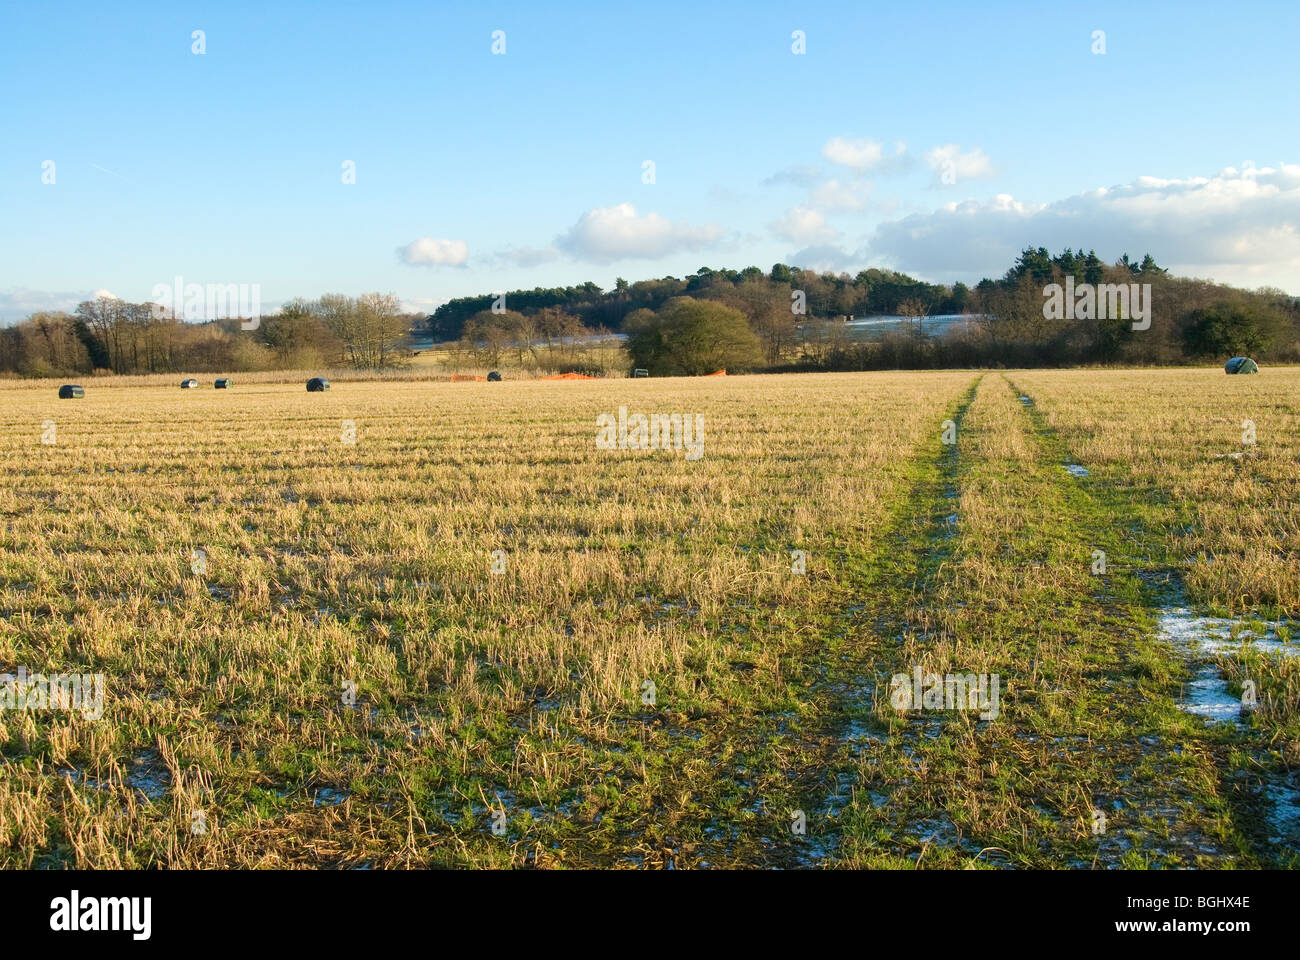 Landscape scene of a field with straw rolls and small amount of snow on the ground in Dockenfield, Hampshire Stock Photo